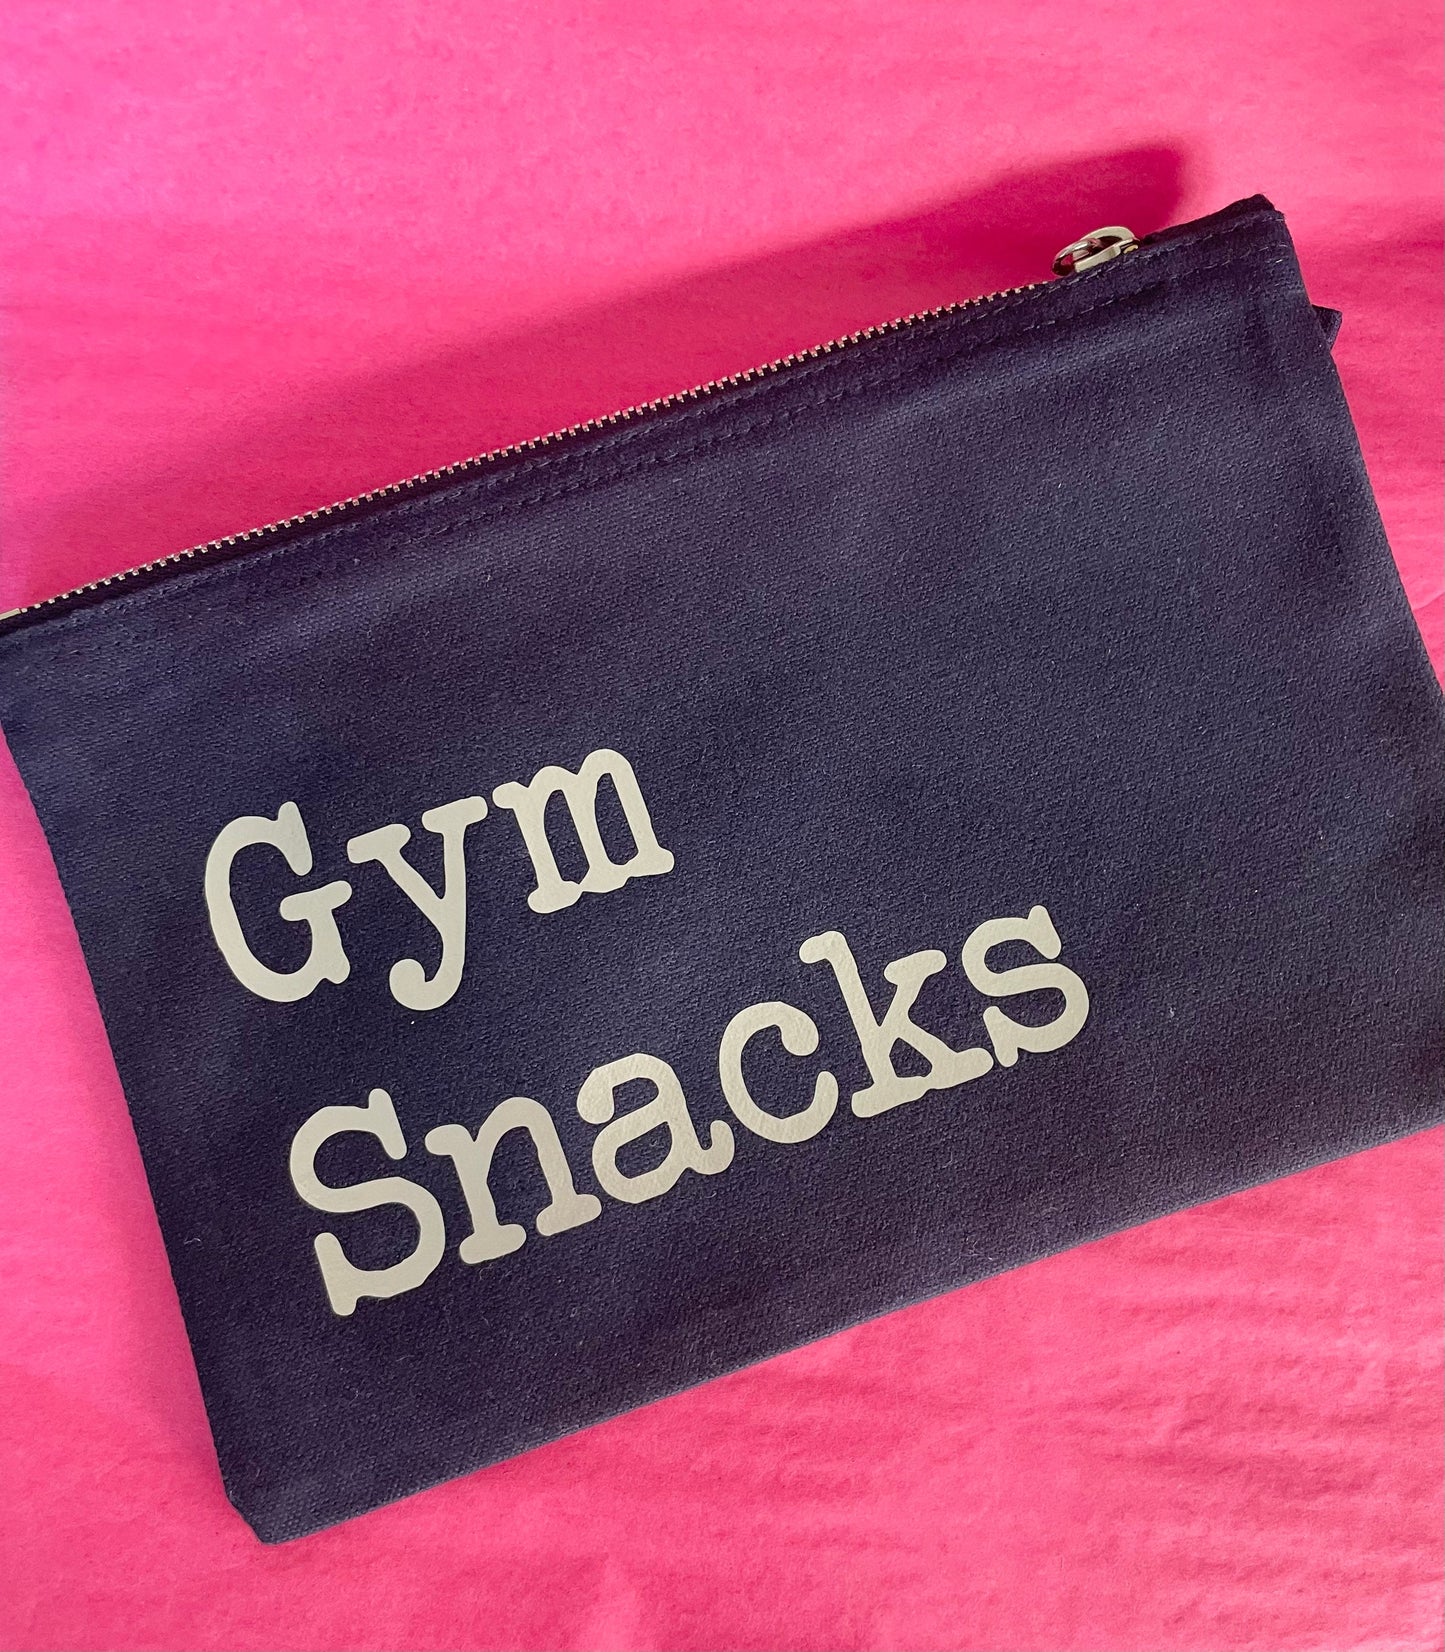 Gym Snacks pouch bag, personalised gym pouch for protein bars or energy drinks, Father’s Day gift for dads